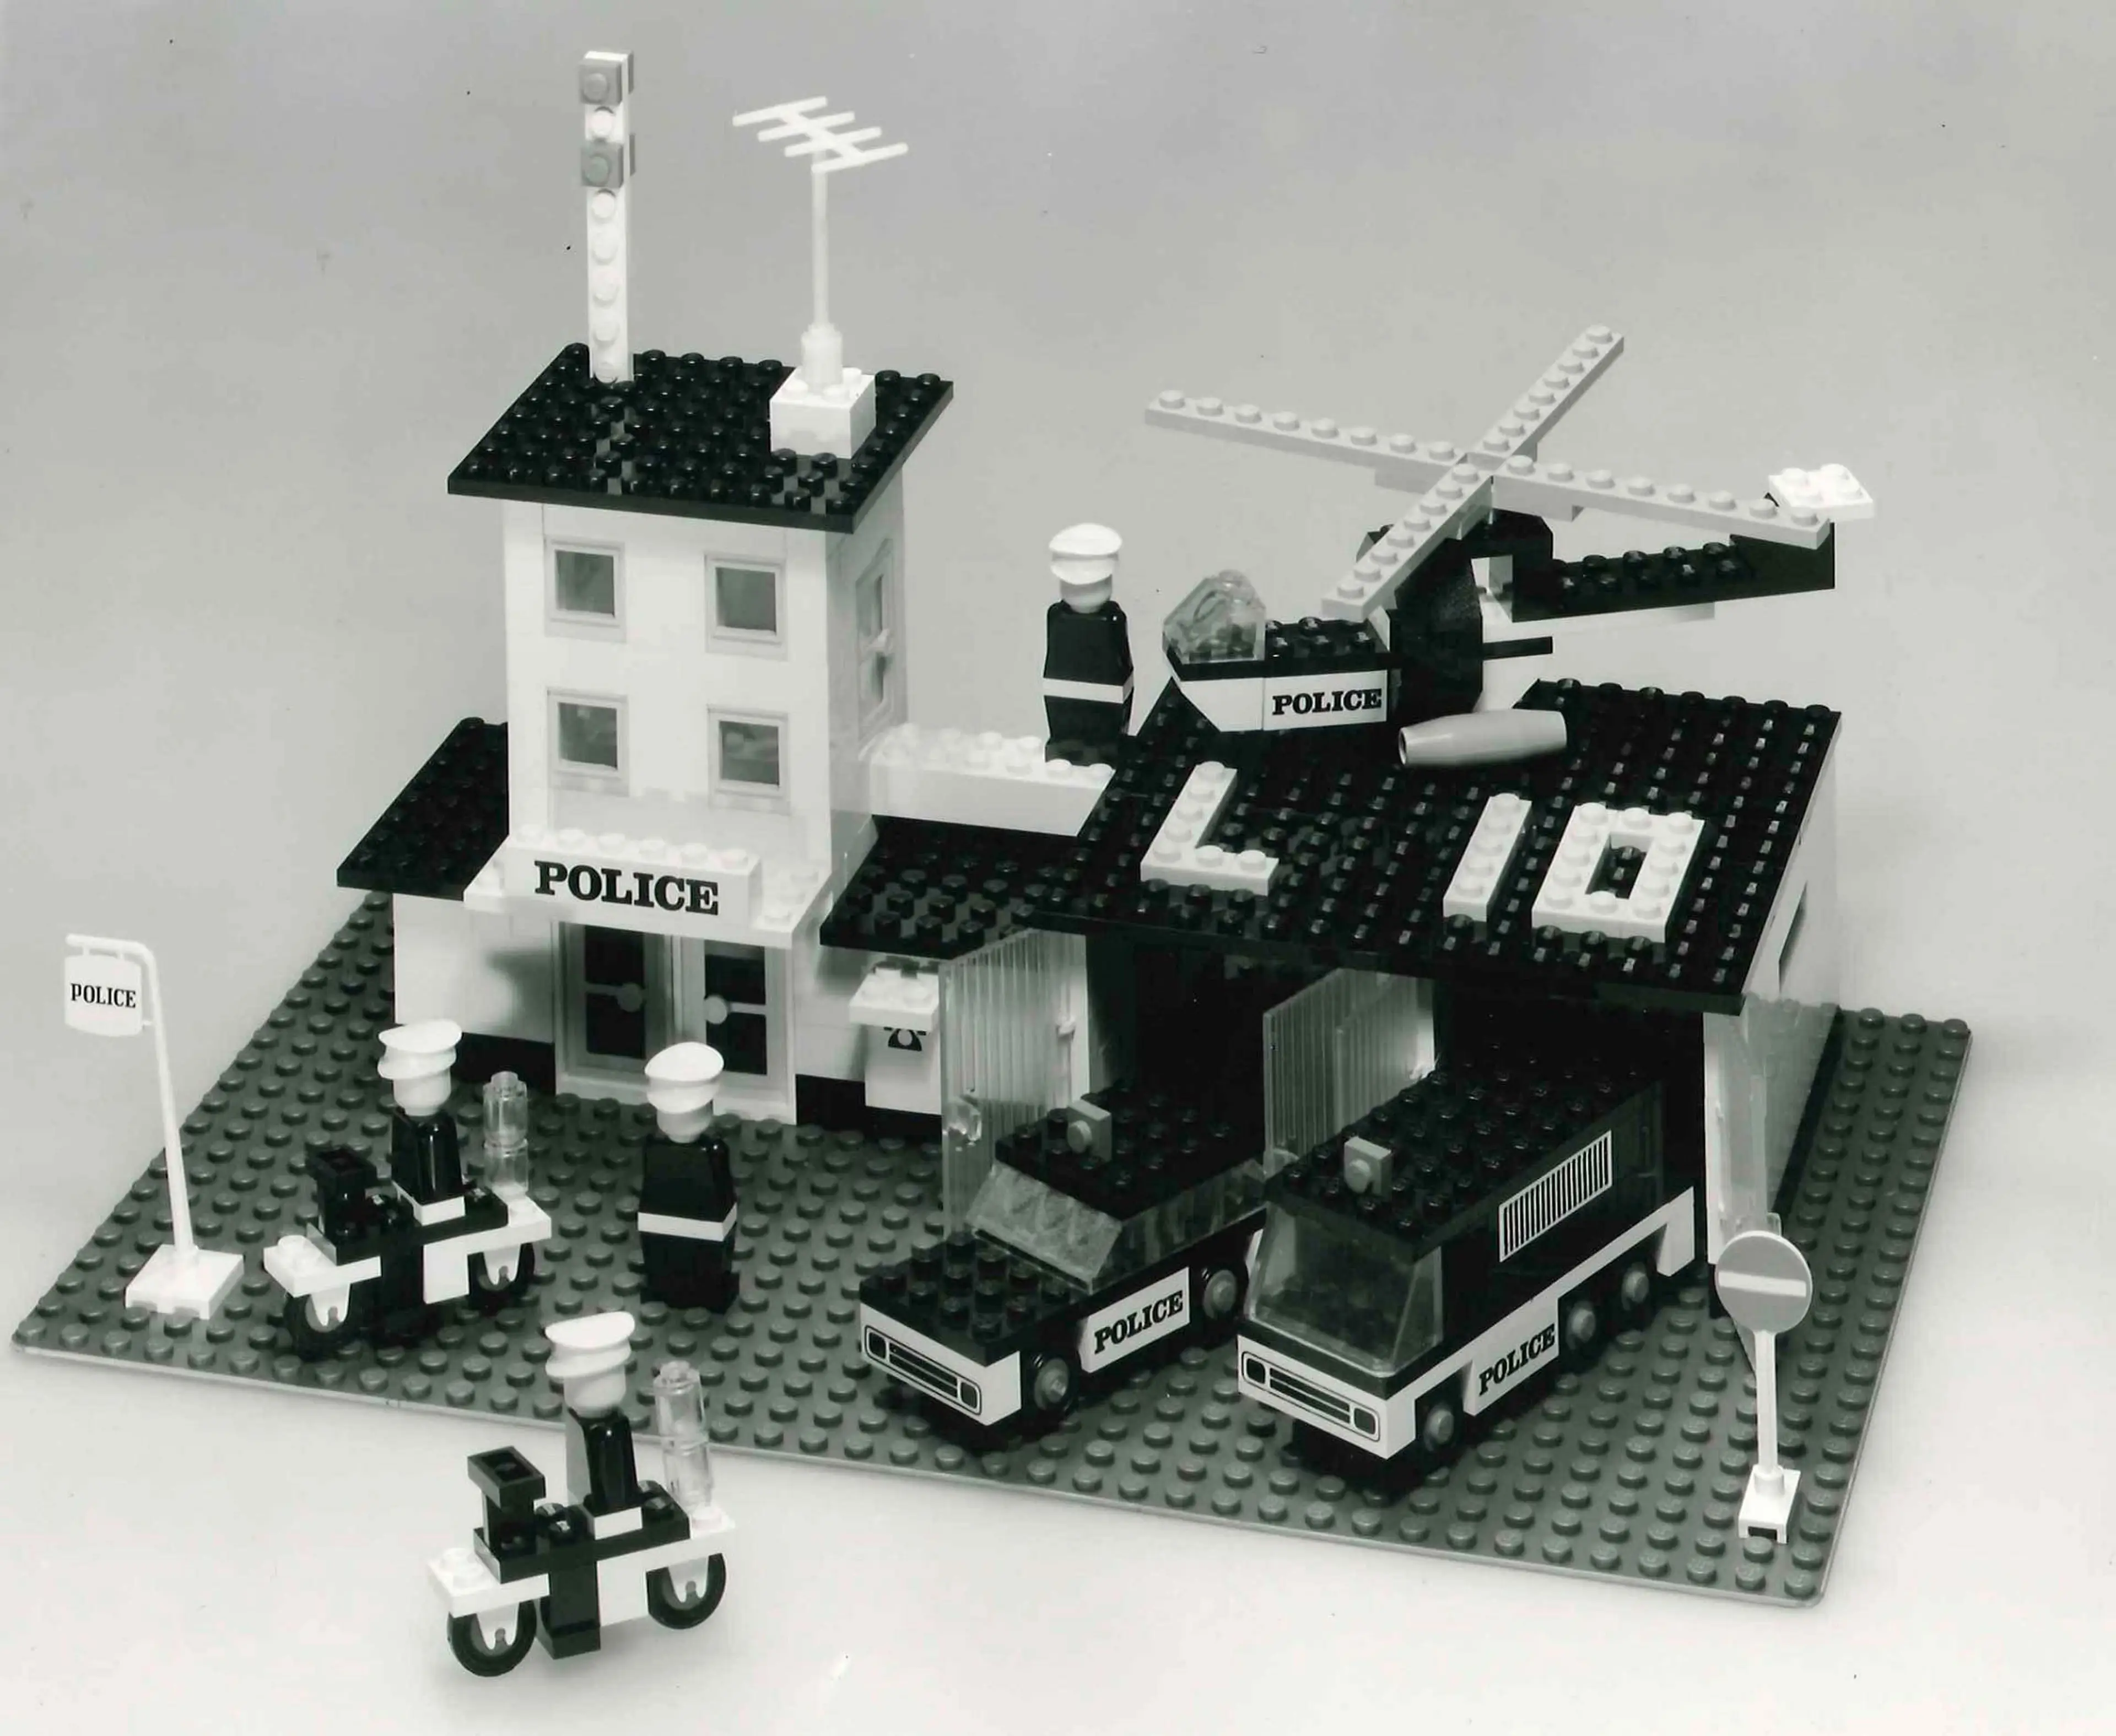 LEGO police station with the extra figures